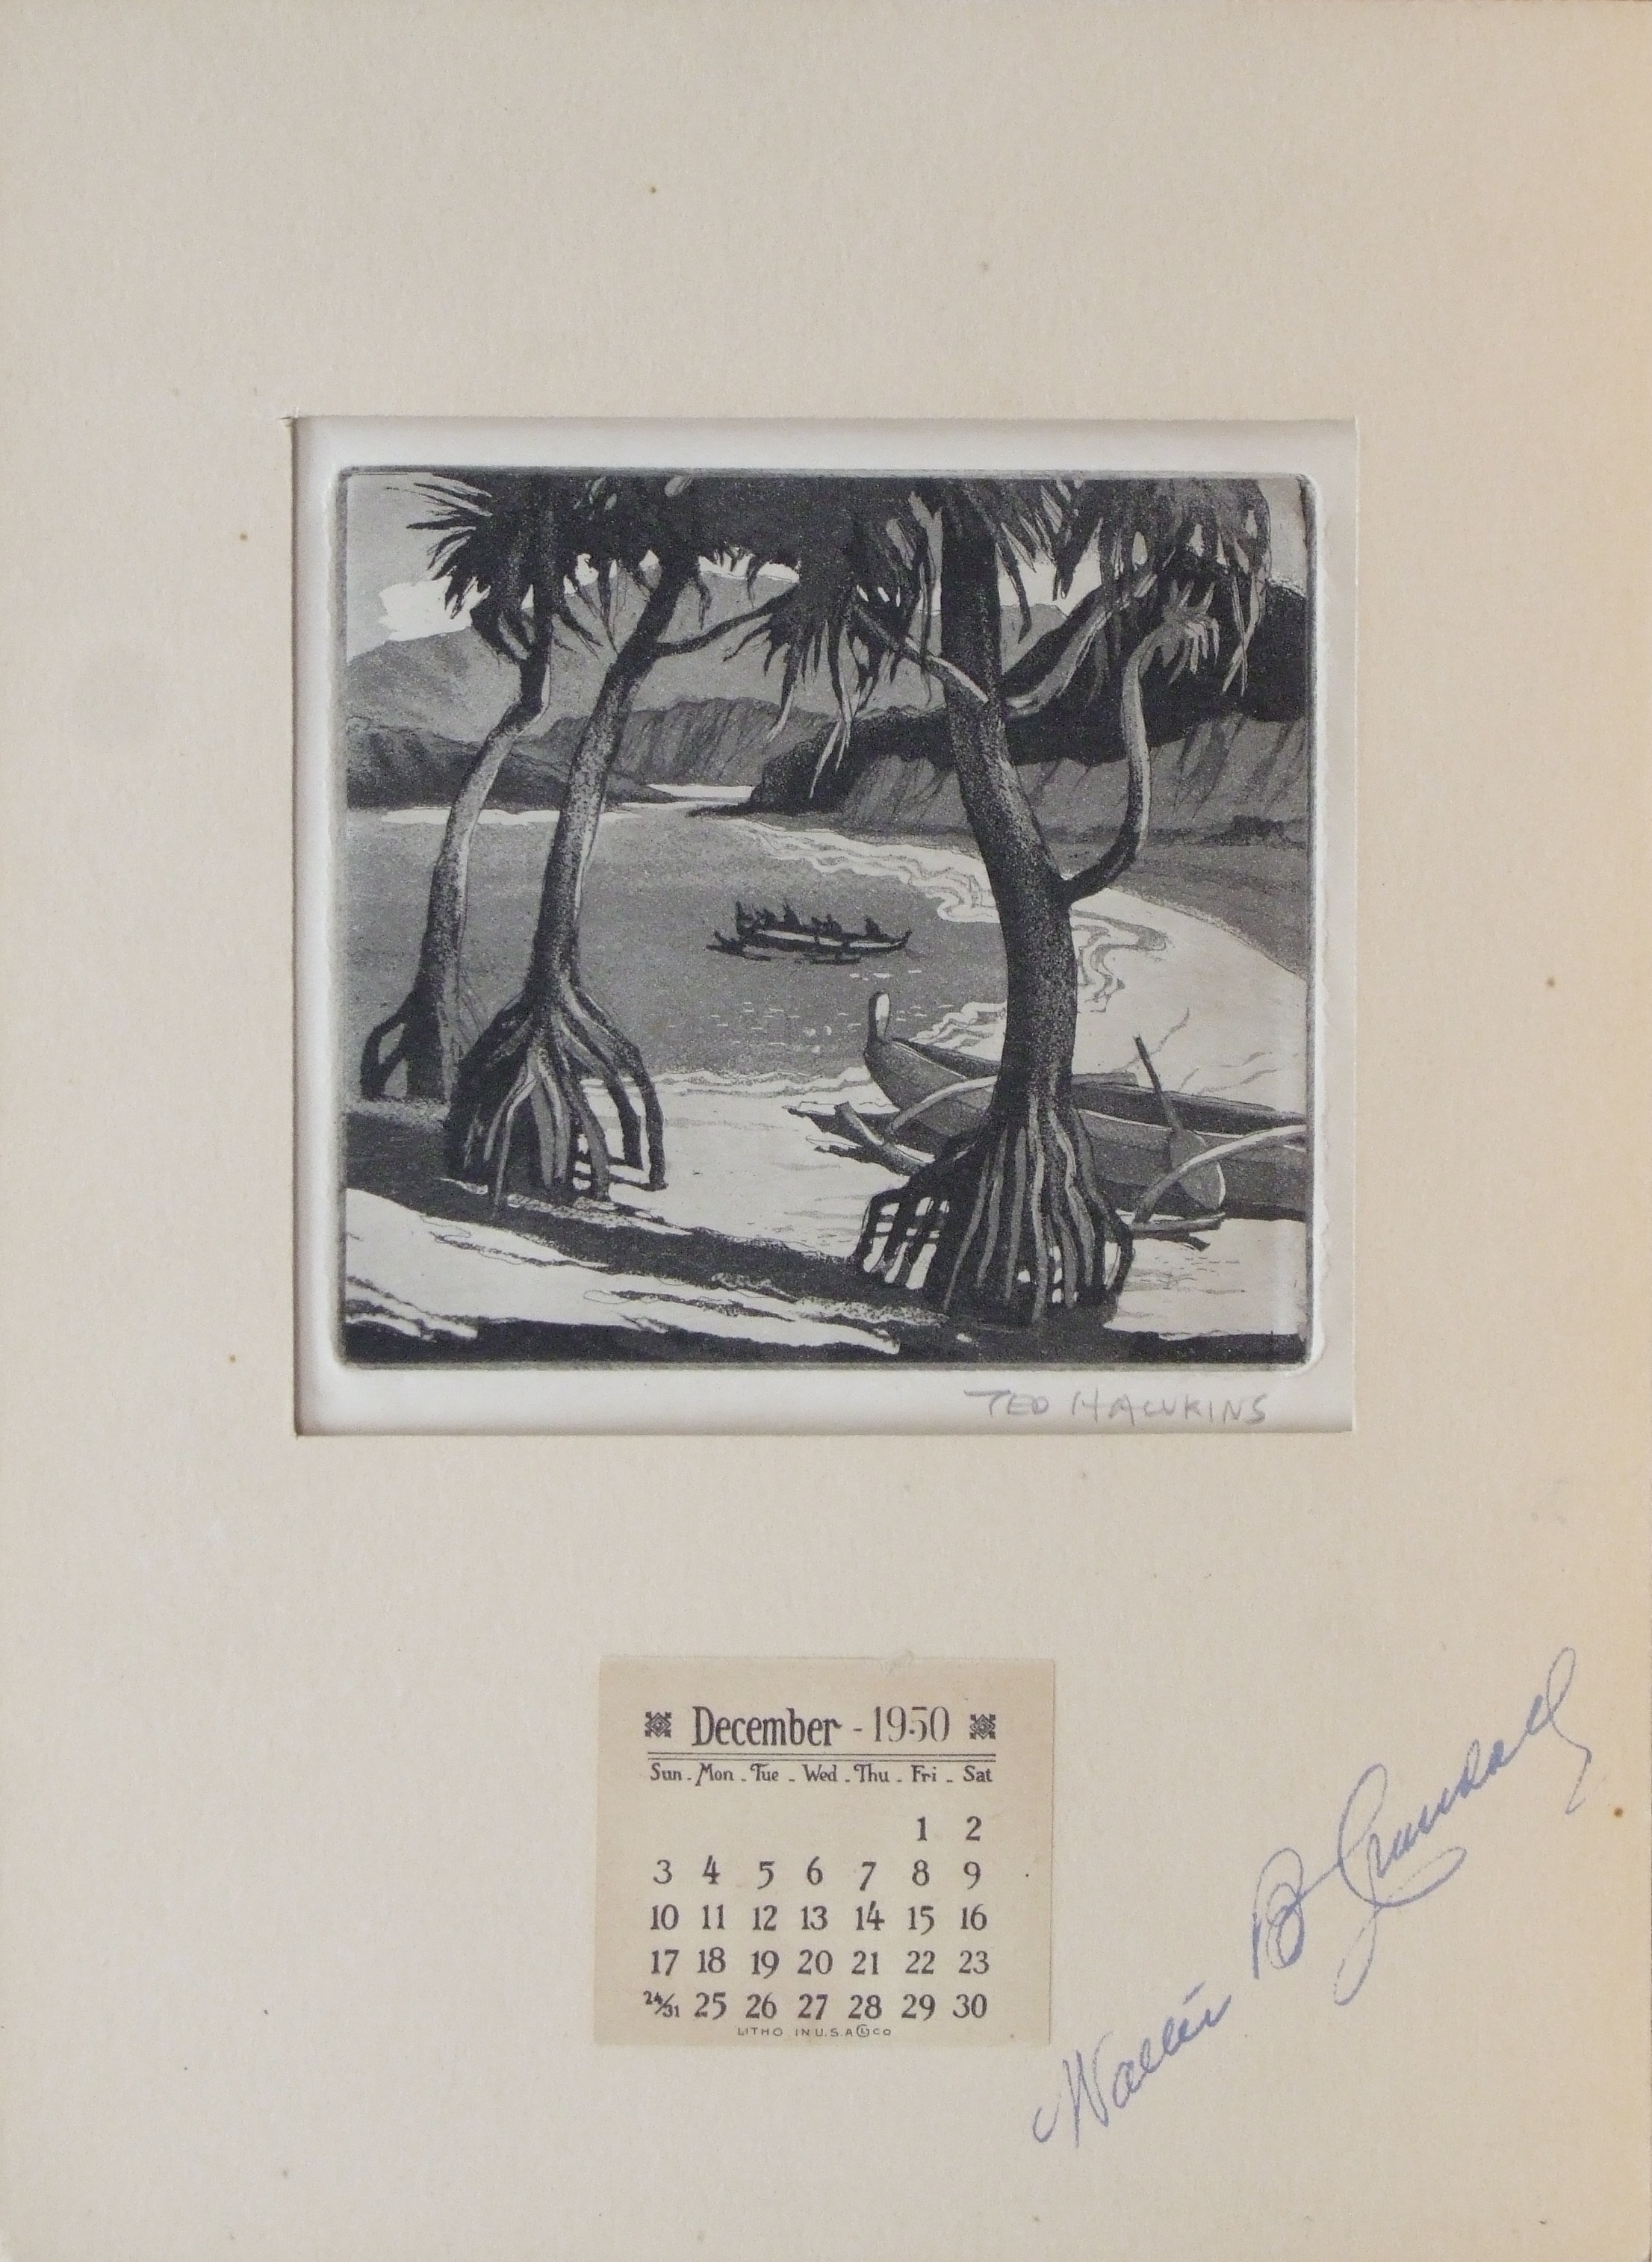 Ted Hawkins, “Untitled (Hawaiian Cove with Outtrigger)”, aquatint